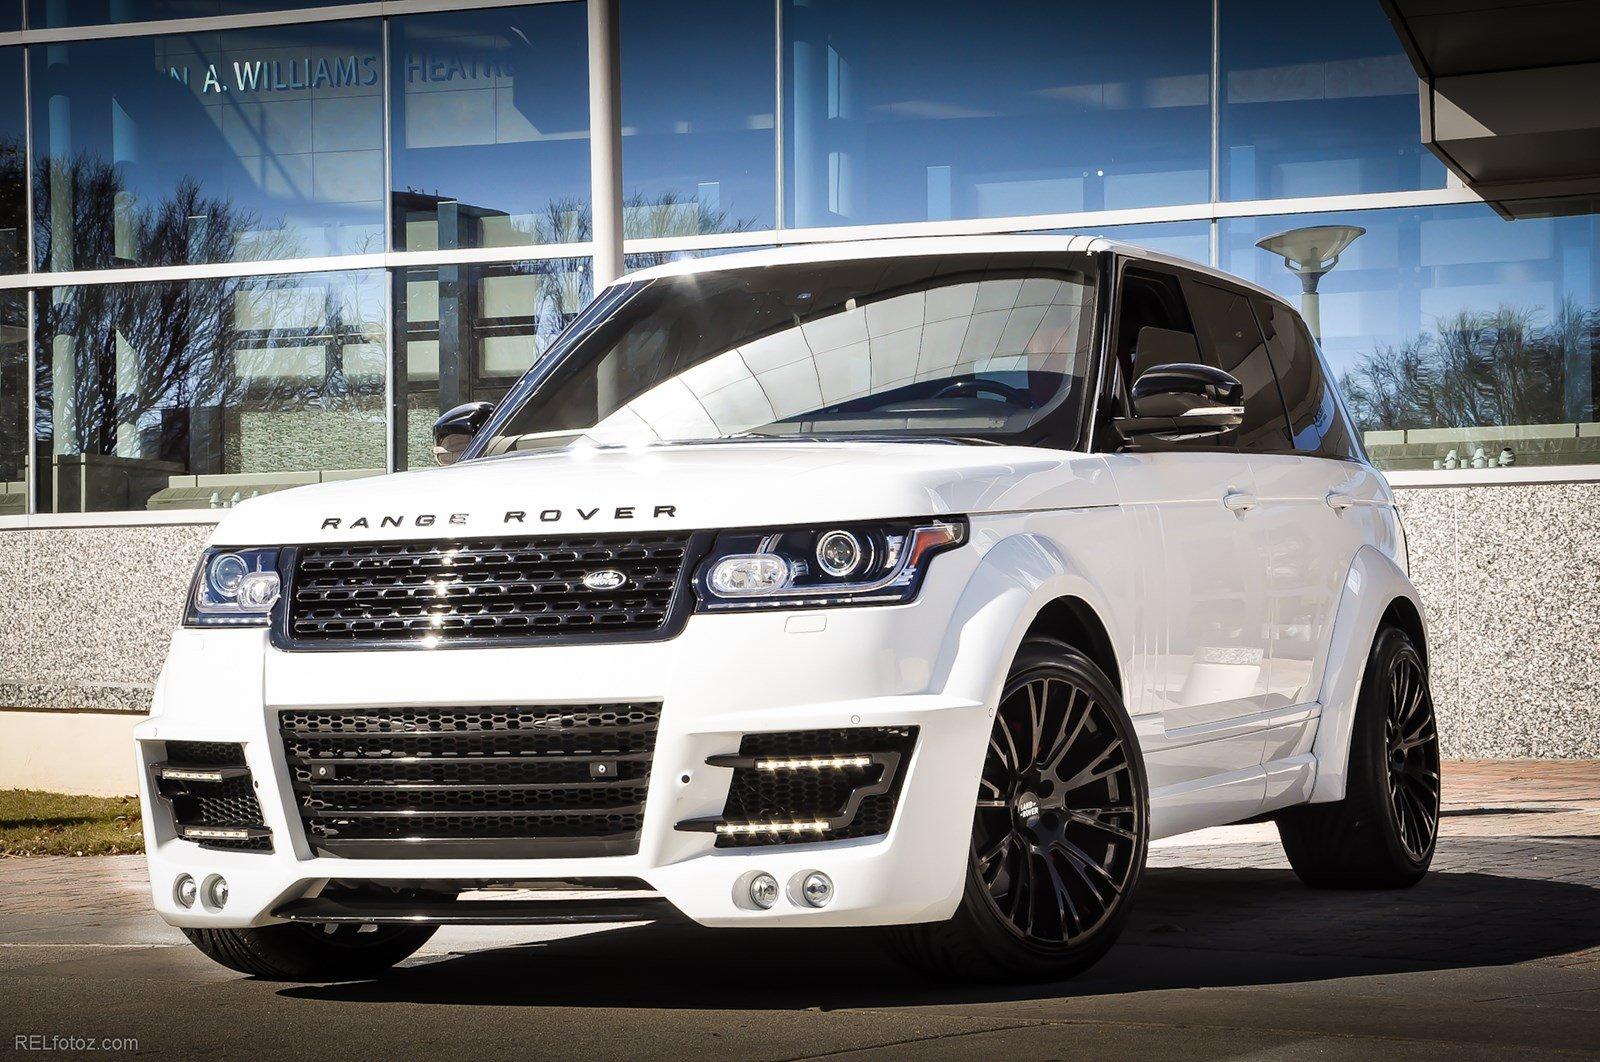 Used 2014 Land Rover Range Rover Supercharged Autobiography for sale Sold at Gravity Autos Marietta in Marietta GA 30060 1